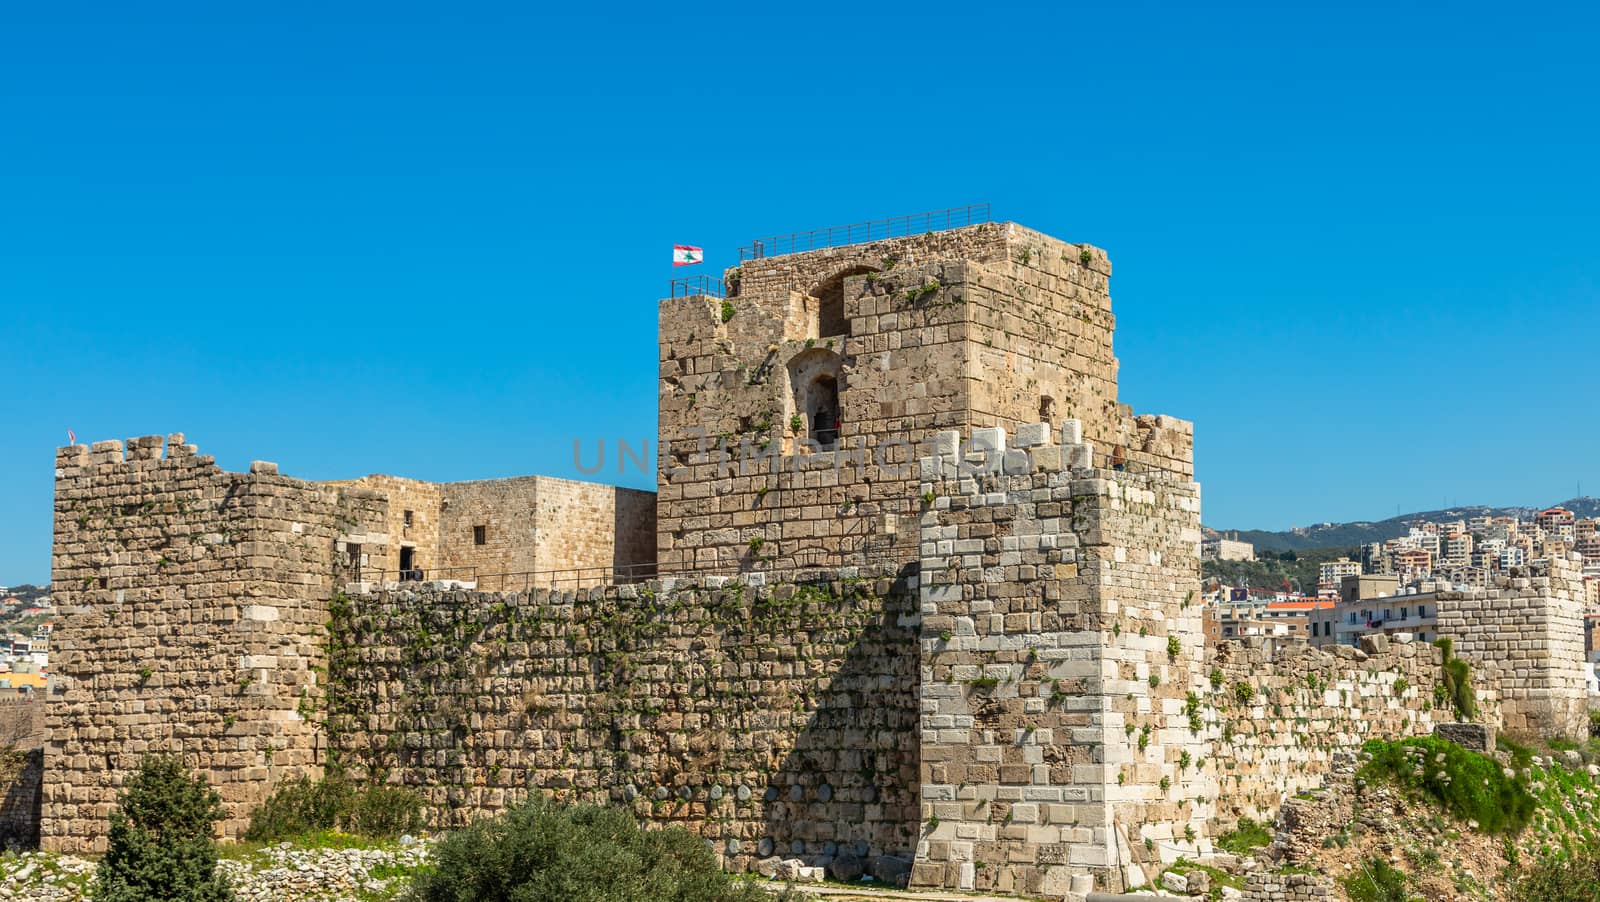 Gibelet old crusader castle walls and towers in Byblos, Lebanon by ambeon